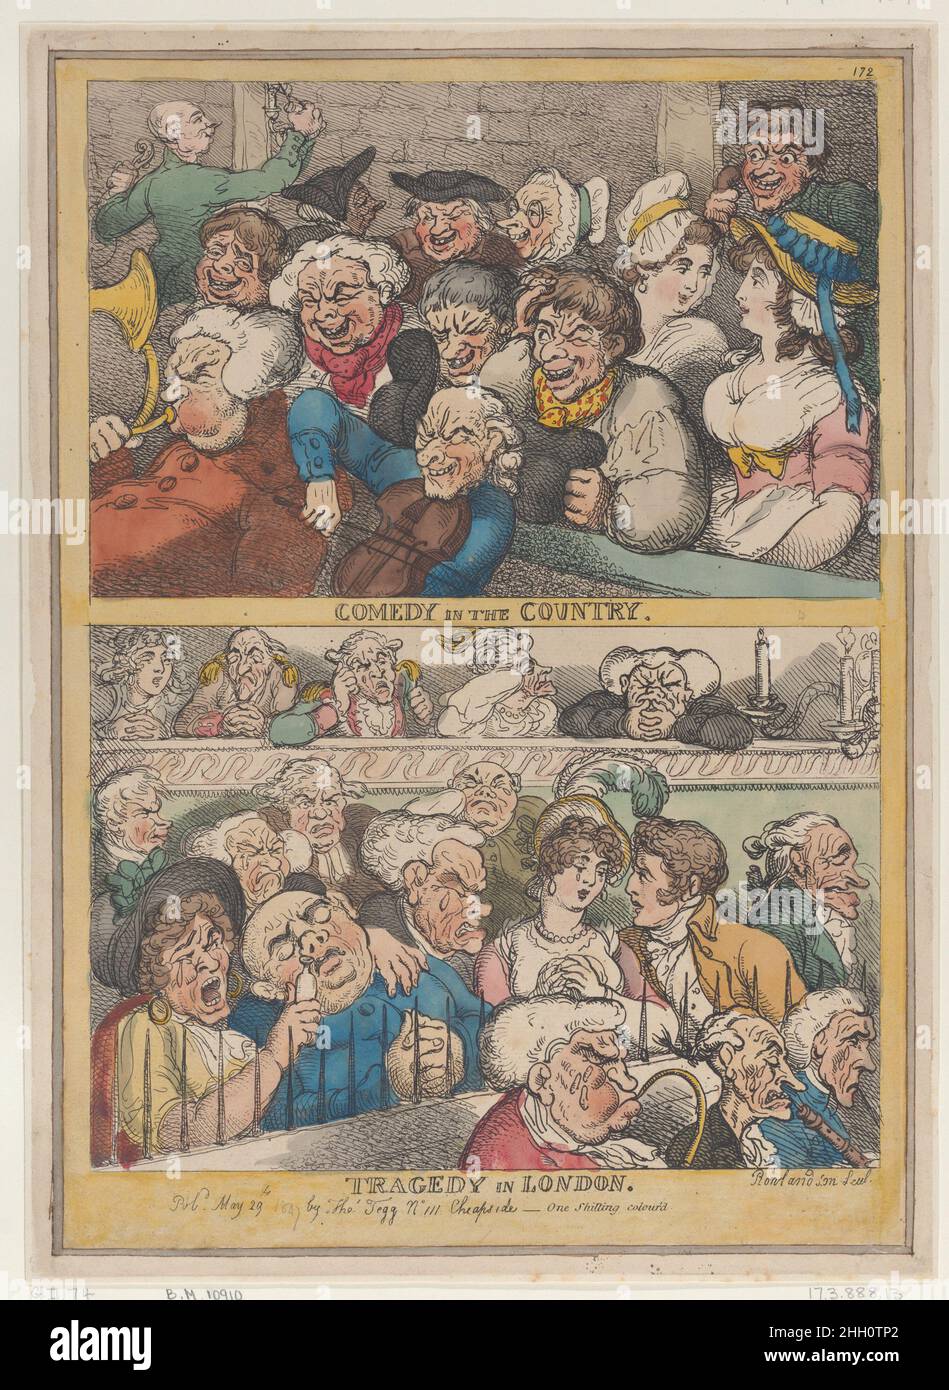 Comedy in the Country, Tragedy in London May 29, 1807 Thomas Rowlandson At top, a group of men and two women sit behind the orchestra, laughing. Below, spectators sit crying behind a weeping orchestra. A woman administers a smelling bottle to a fainting, crying man at left.. Comedy in the Country, Tragedy in London. Thomas Rowlandson (British, London 1757–1827 London). May 29, 1807. Hand-colored etching. Thomas Tegg (British, 1776–1846). Prints Stock Photo